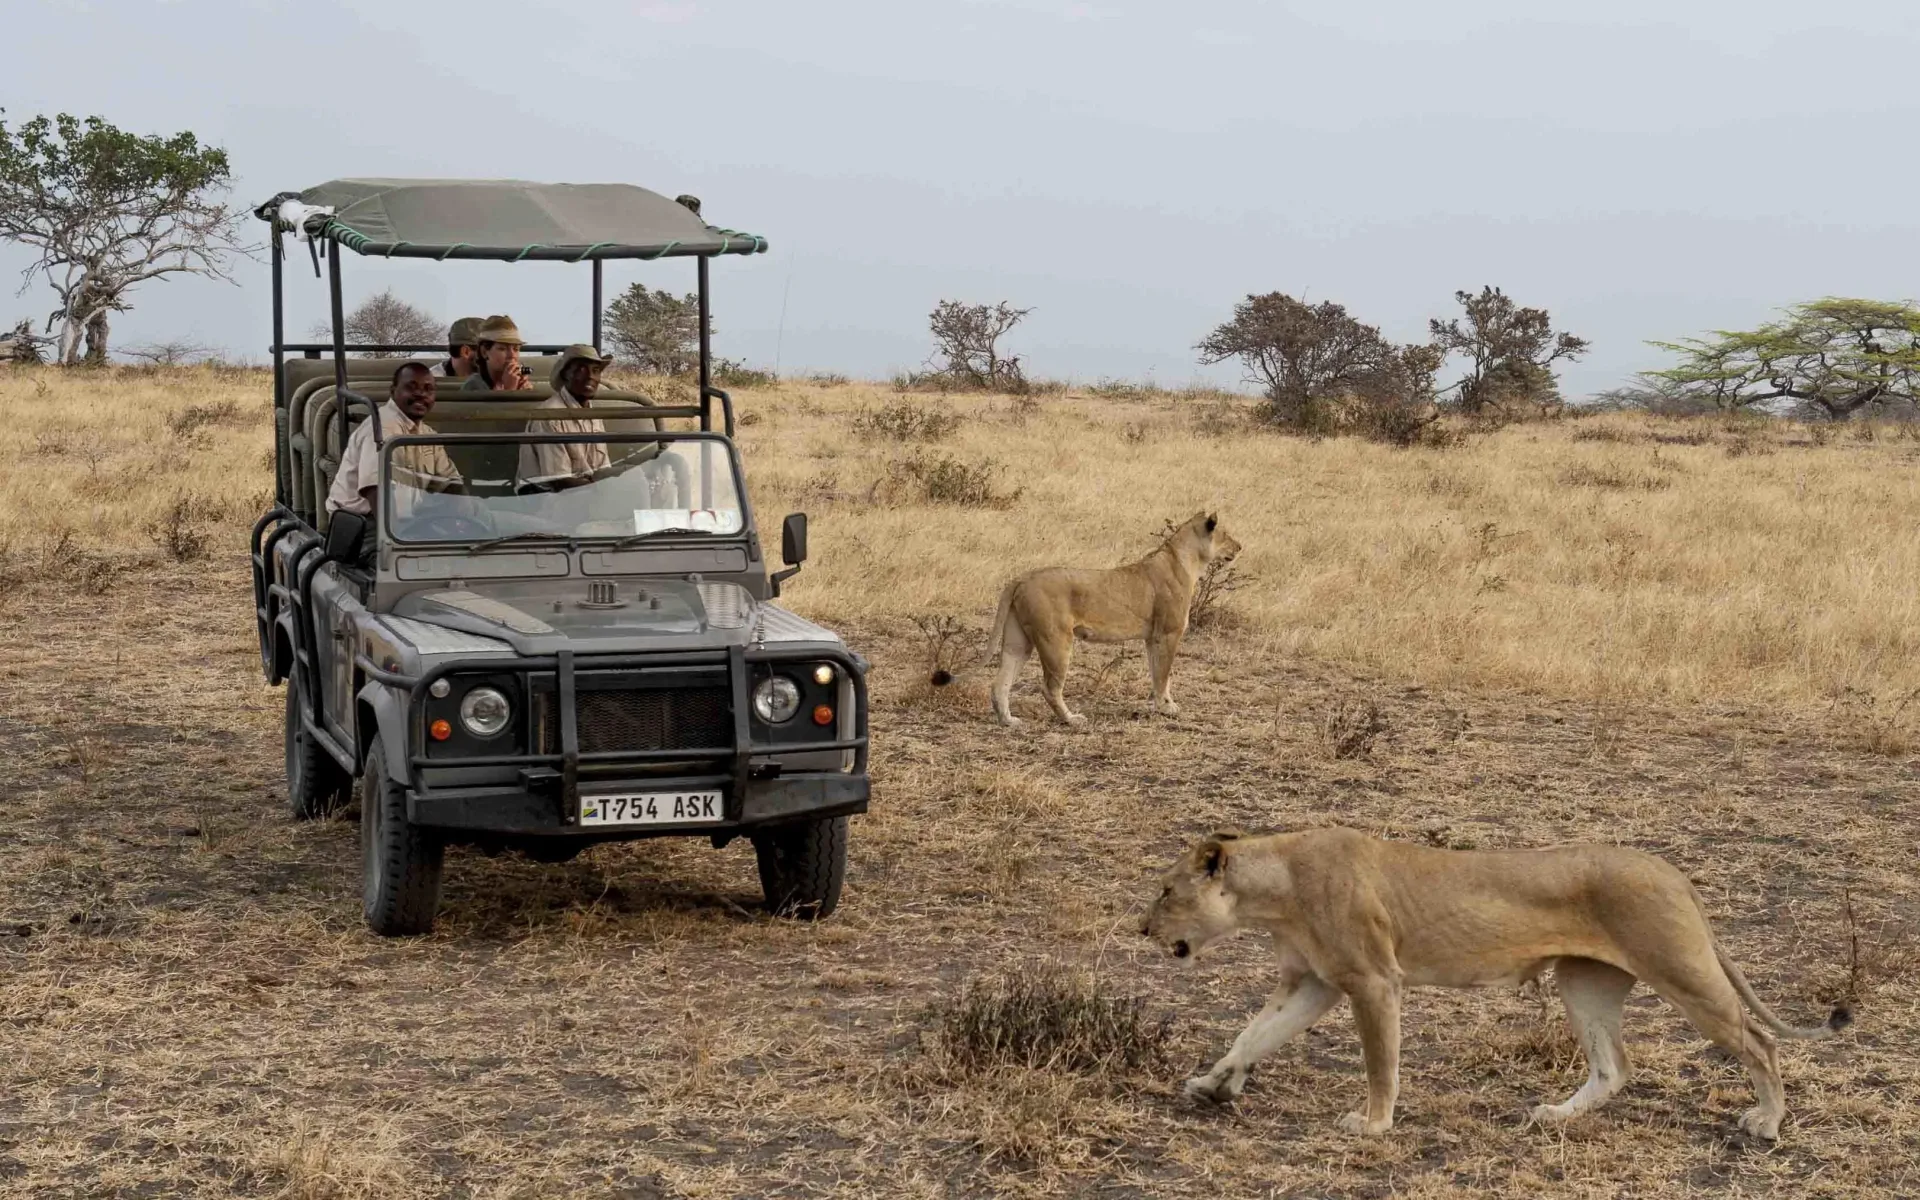 A 4x4 game vehilcle drives up-close to a pair of lionesses as they wander the Nyerere plains.